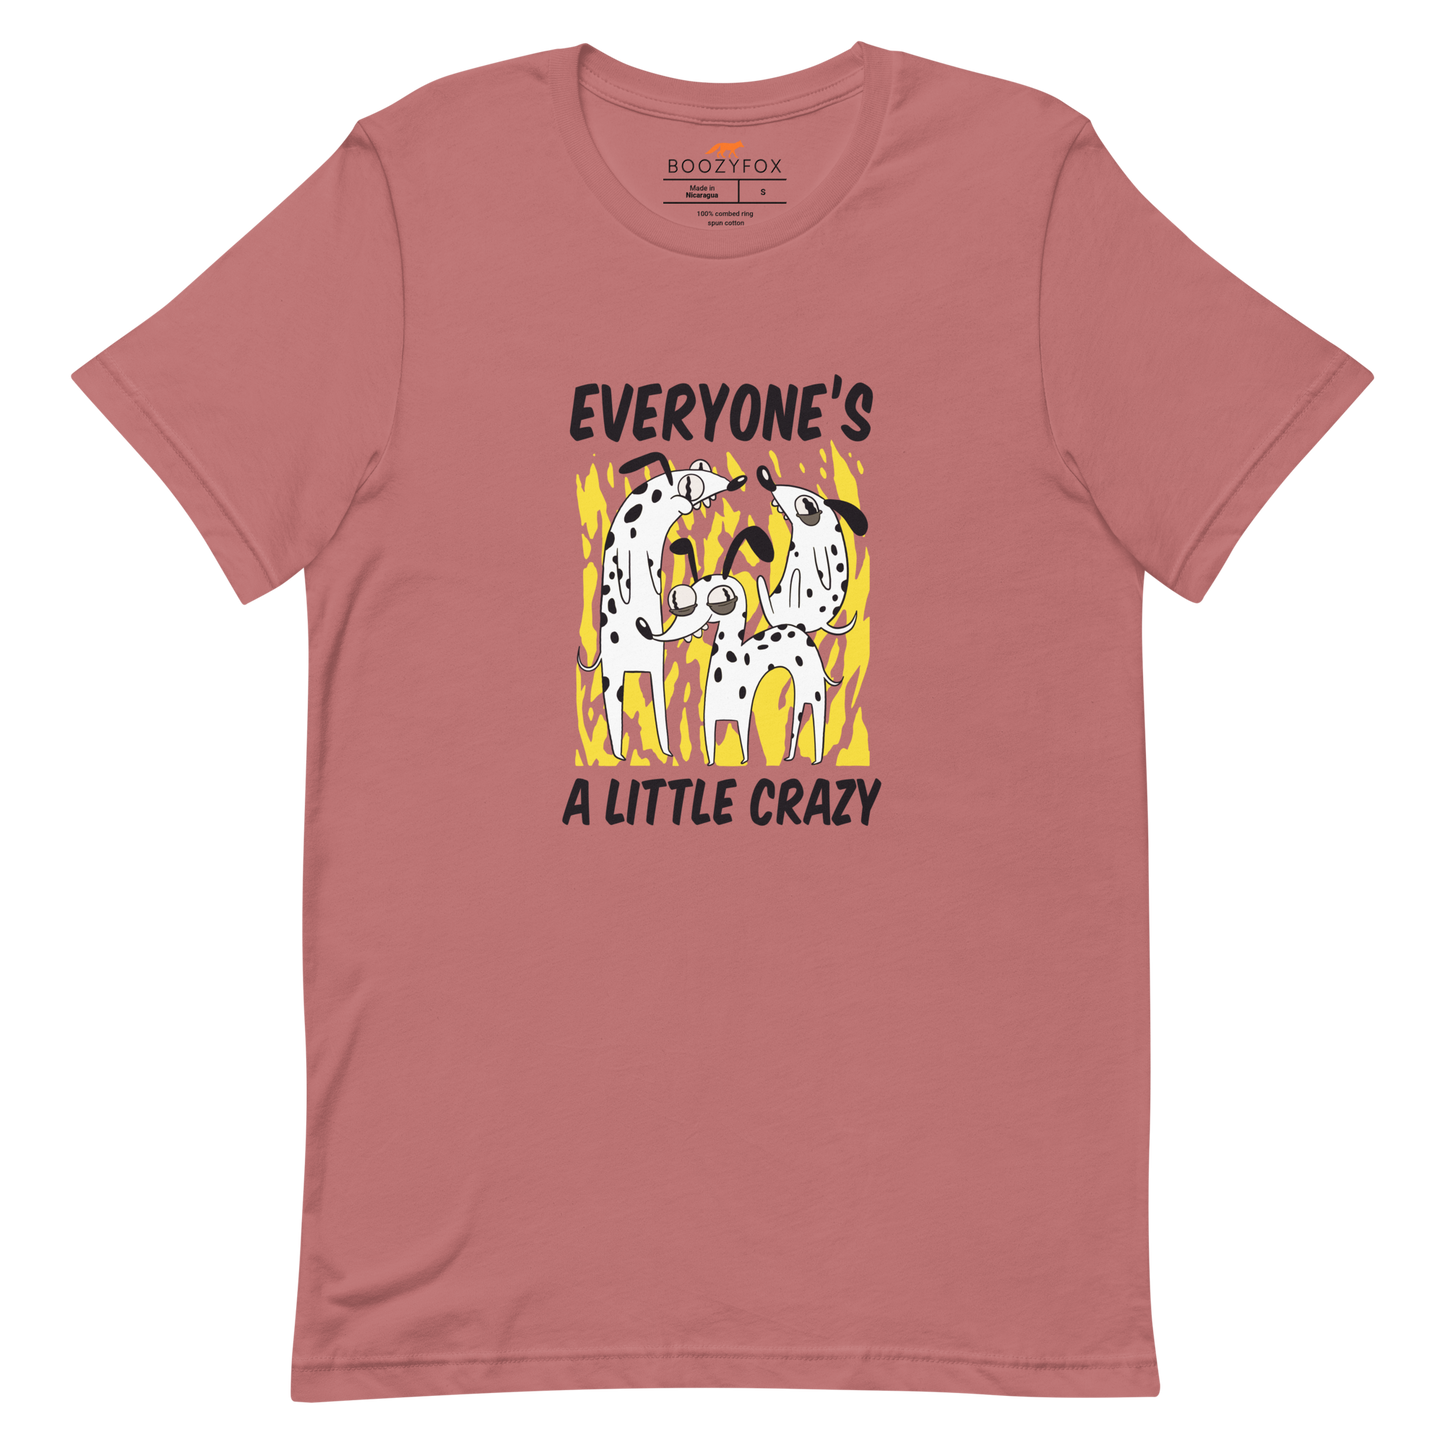 Mauve Premium Dog T-Shirt featuring a Everyone's A Little Crazy graphic on the chest - Funny Graphic Dog Tees - Boozy Fox